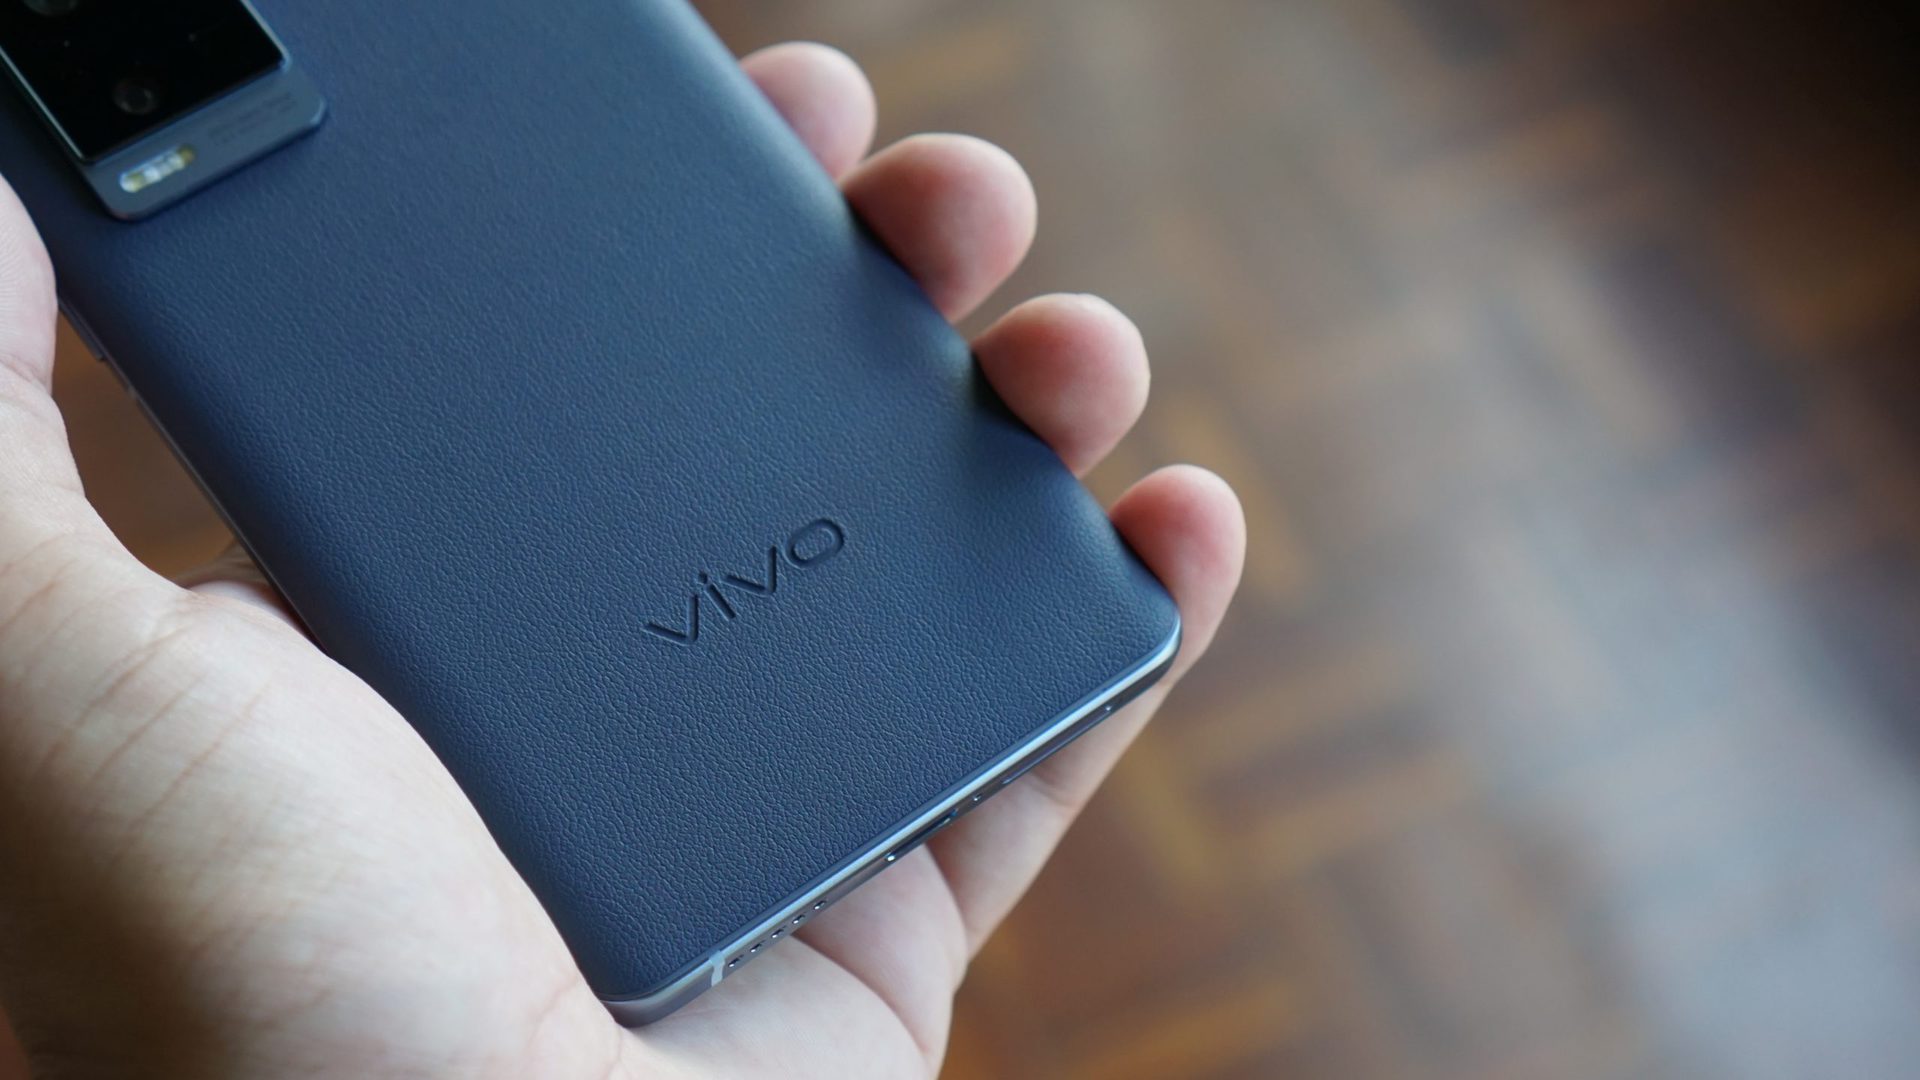 Vivo X60 Pro Plus showing rear with logo in hand